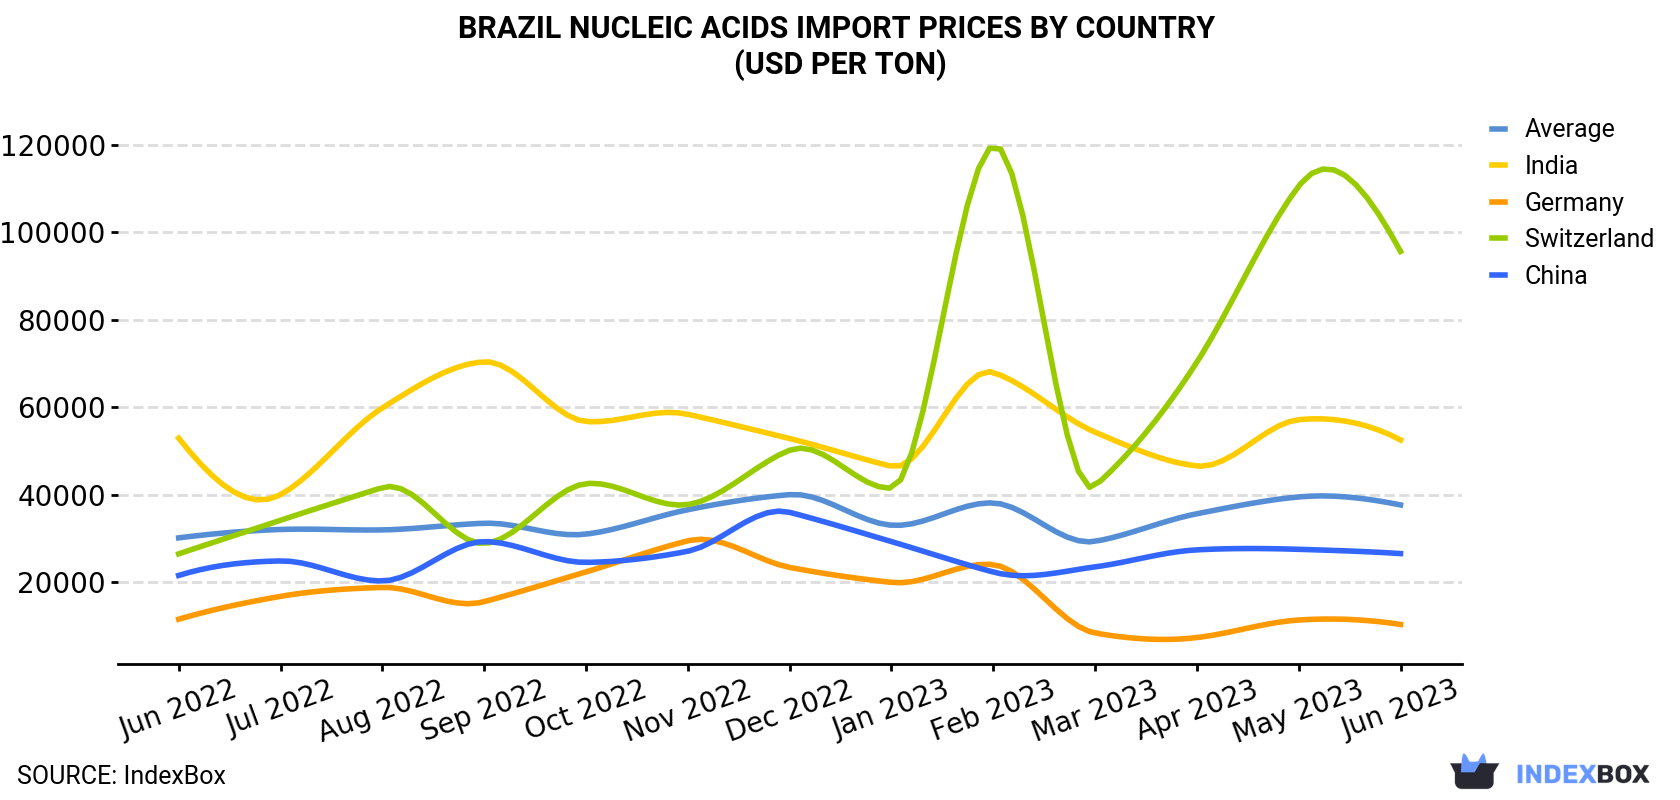 Brazil Nucleic Acids Import Prices By Country (USD Per Ton)